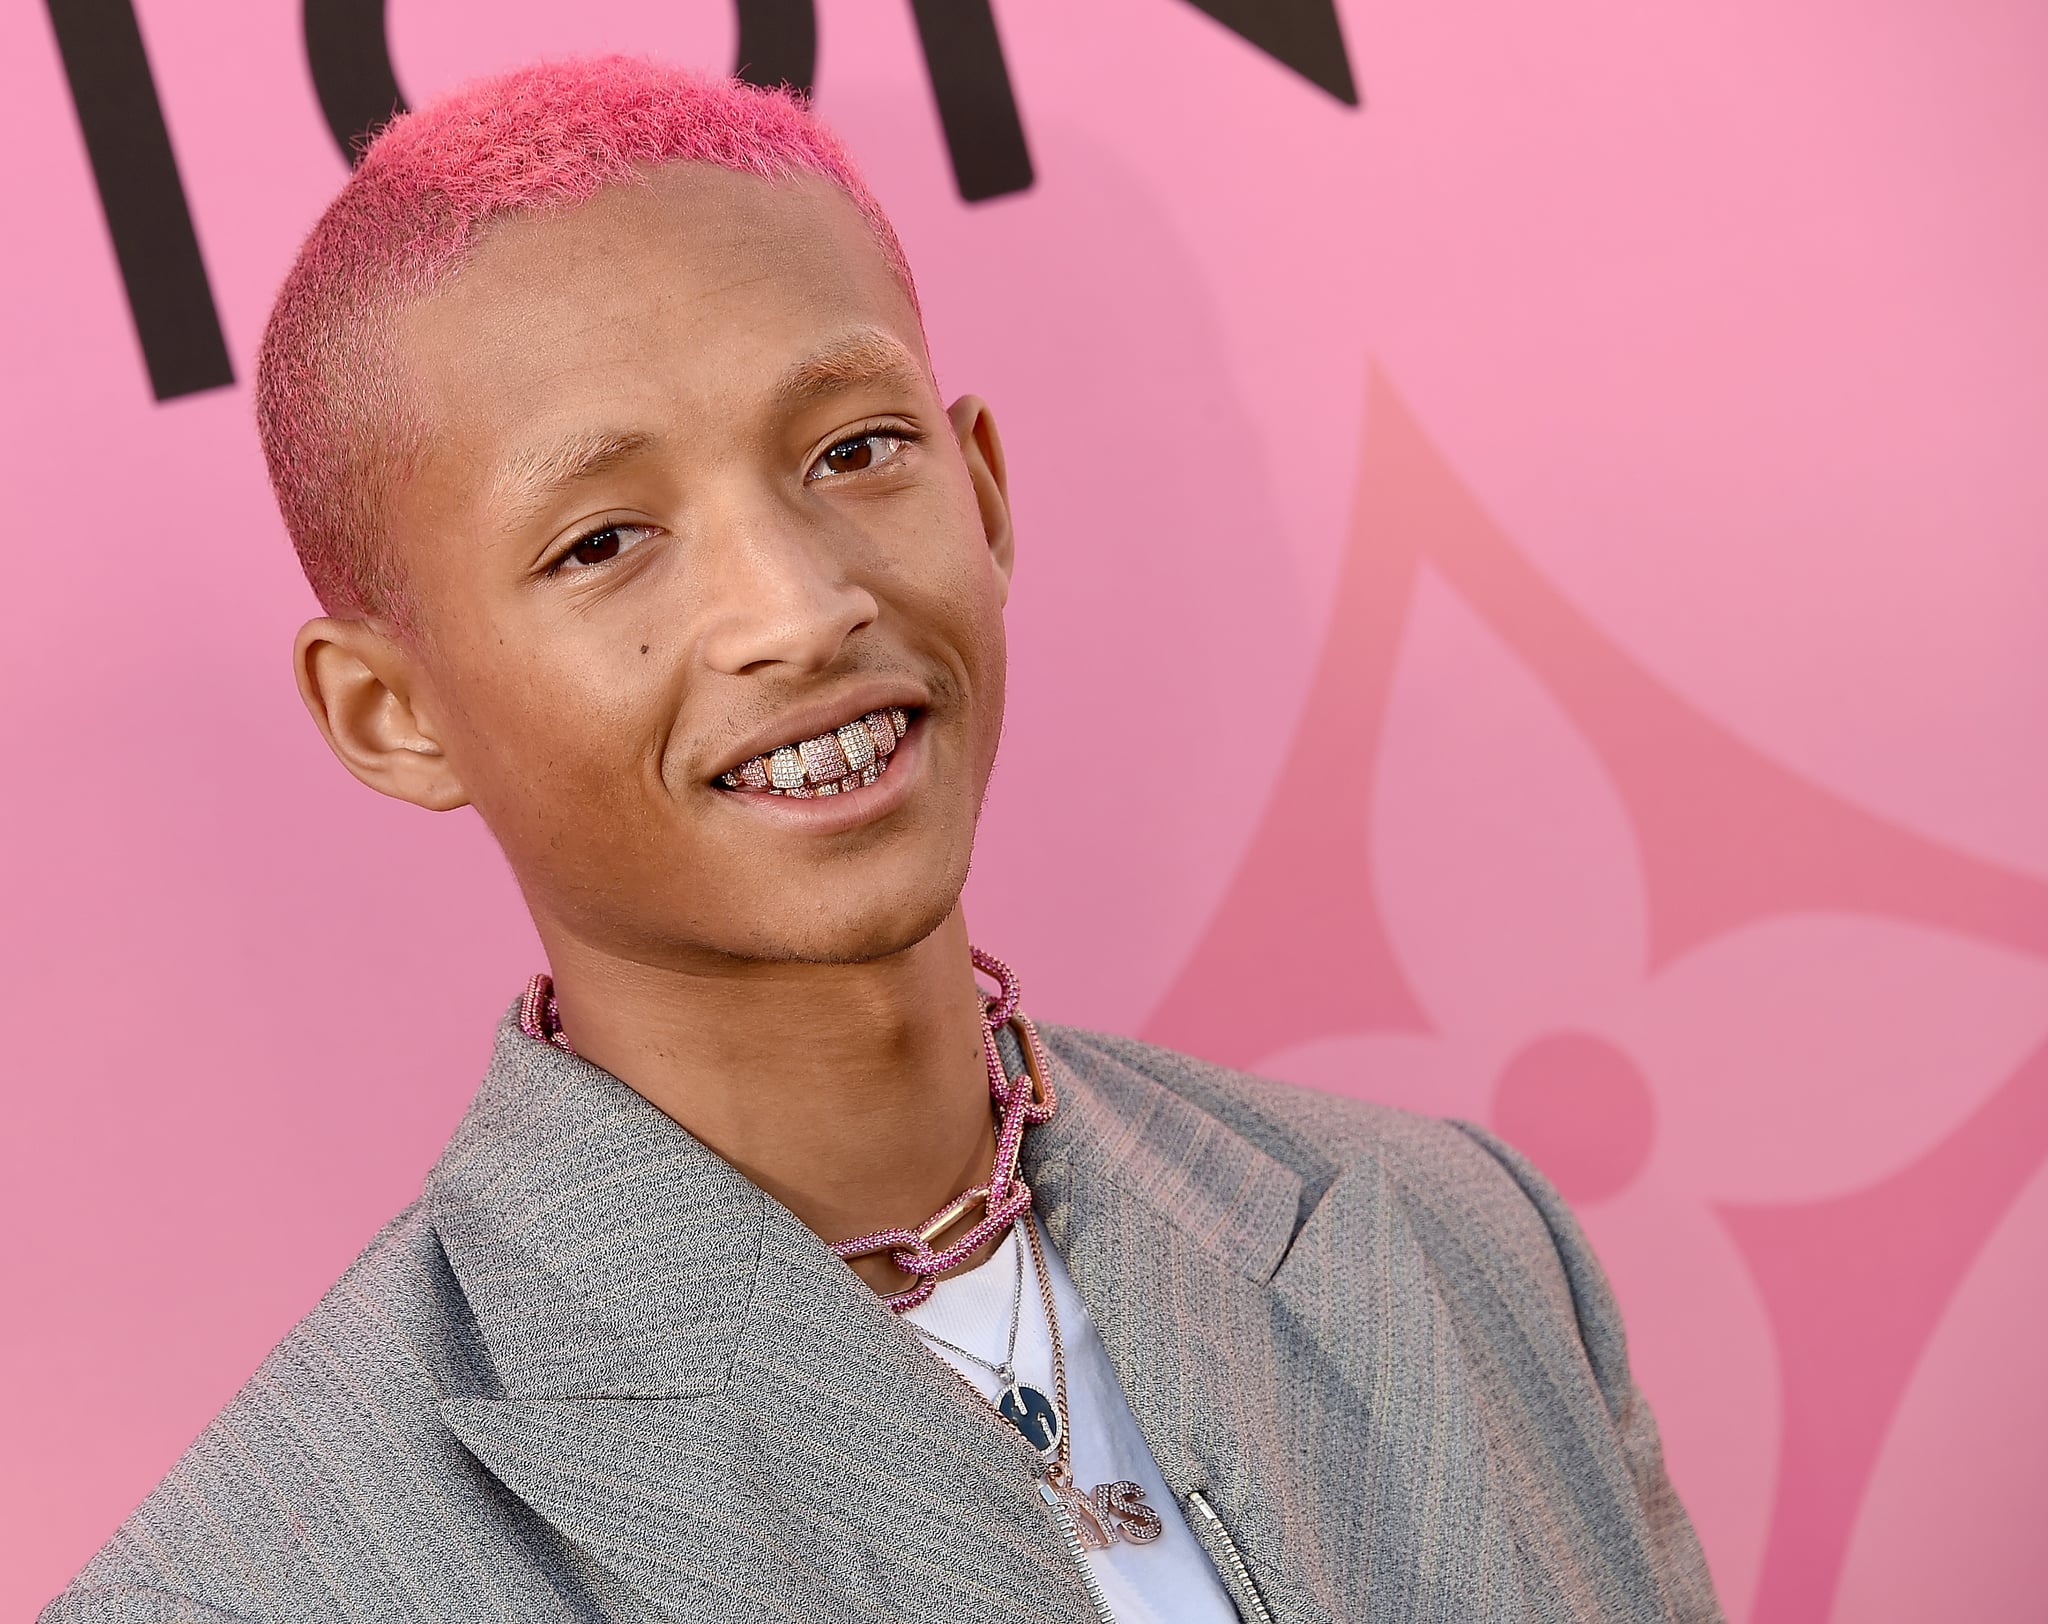 Jaden Smith With Bleached Eyebrows in 2019. 